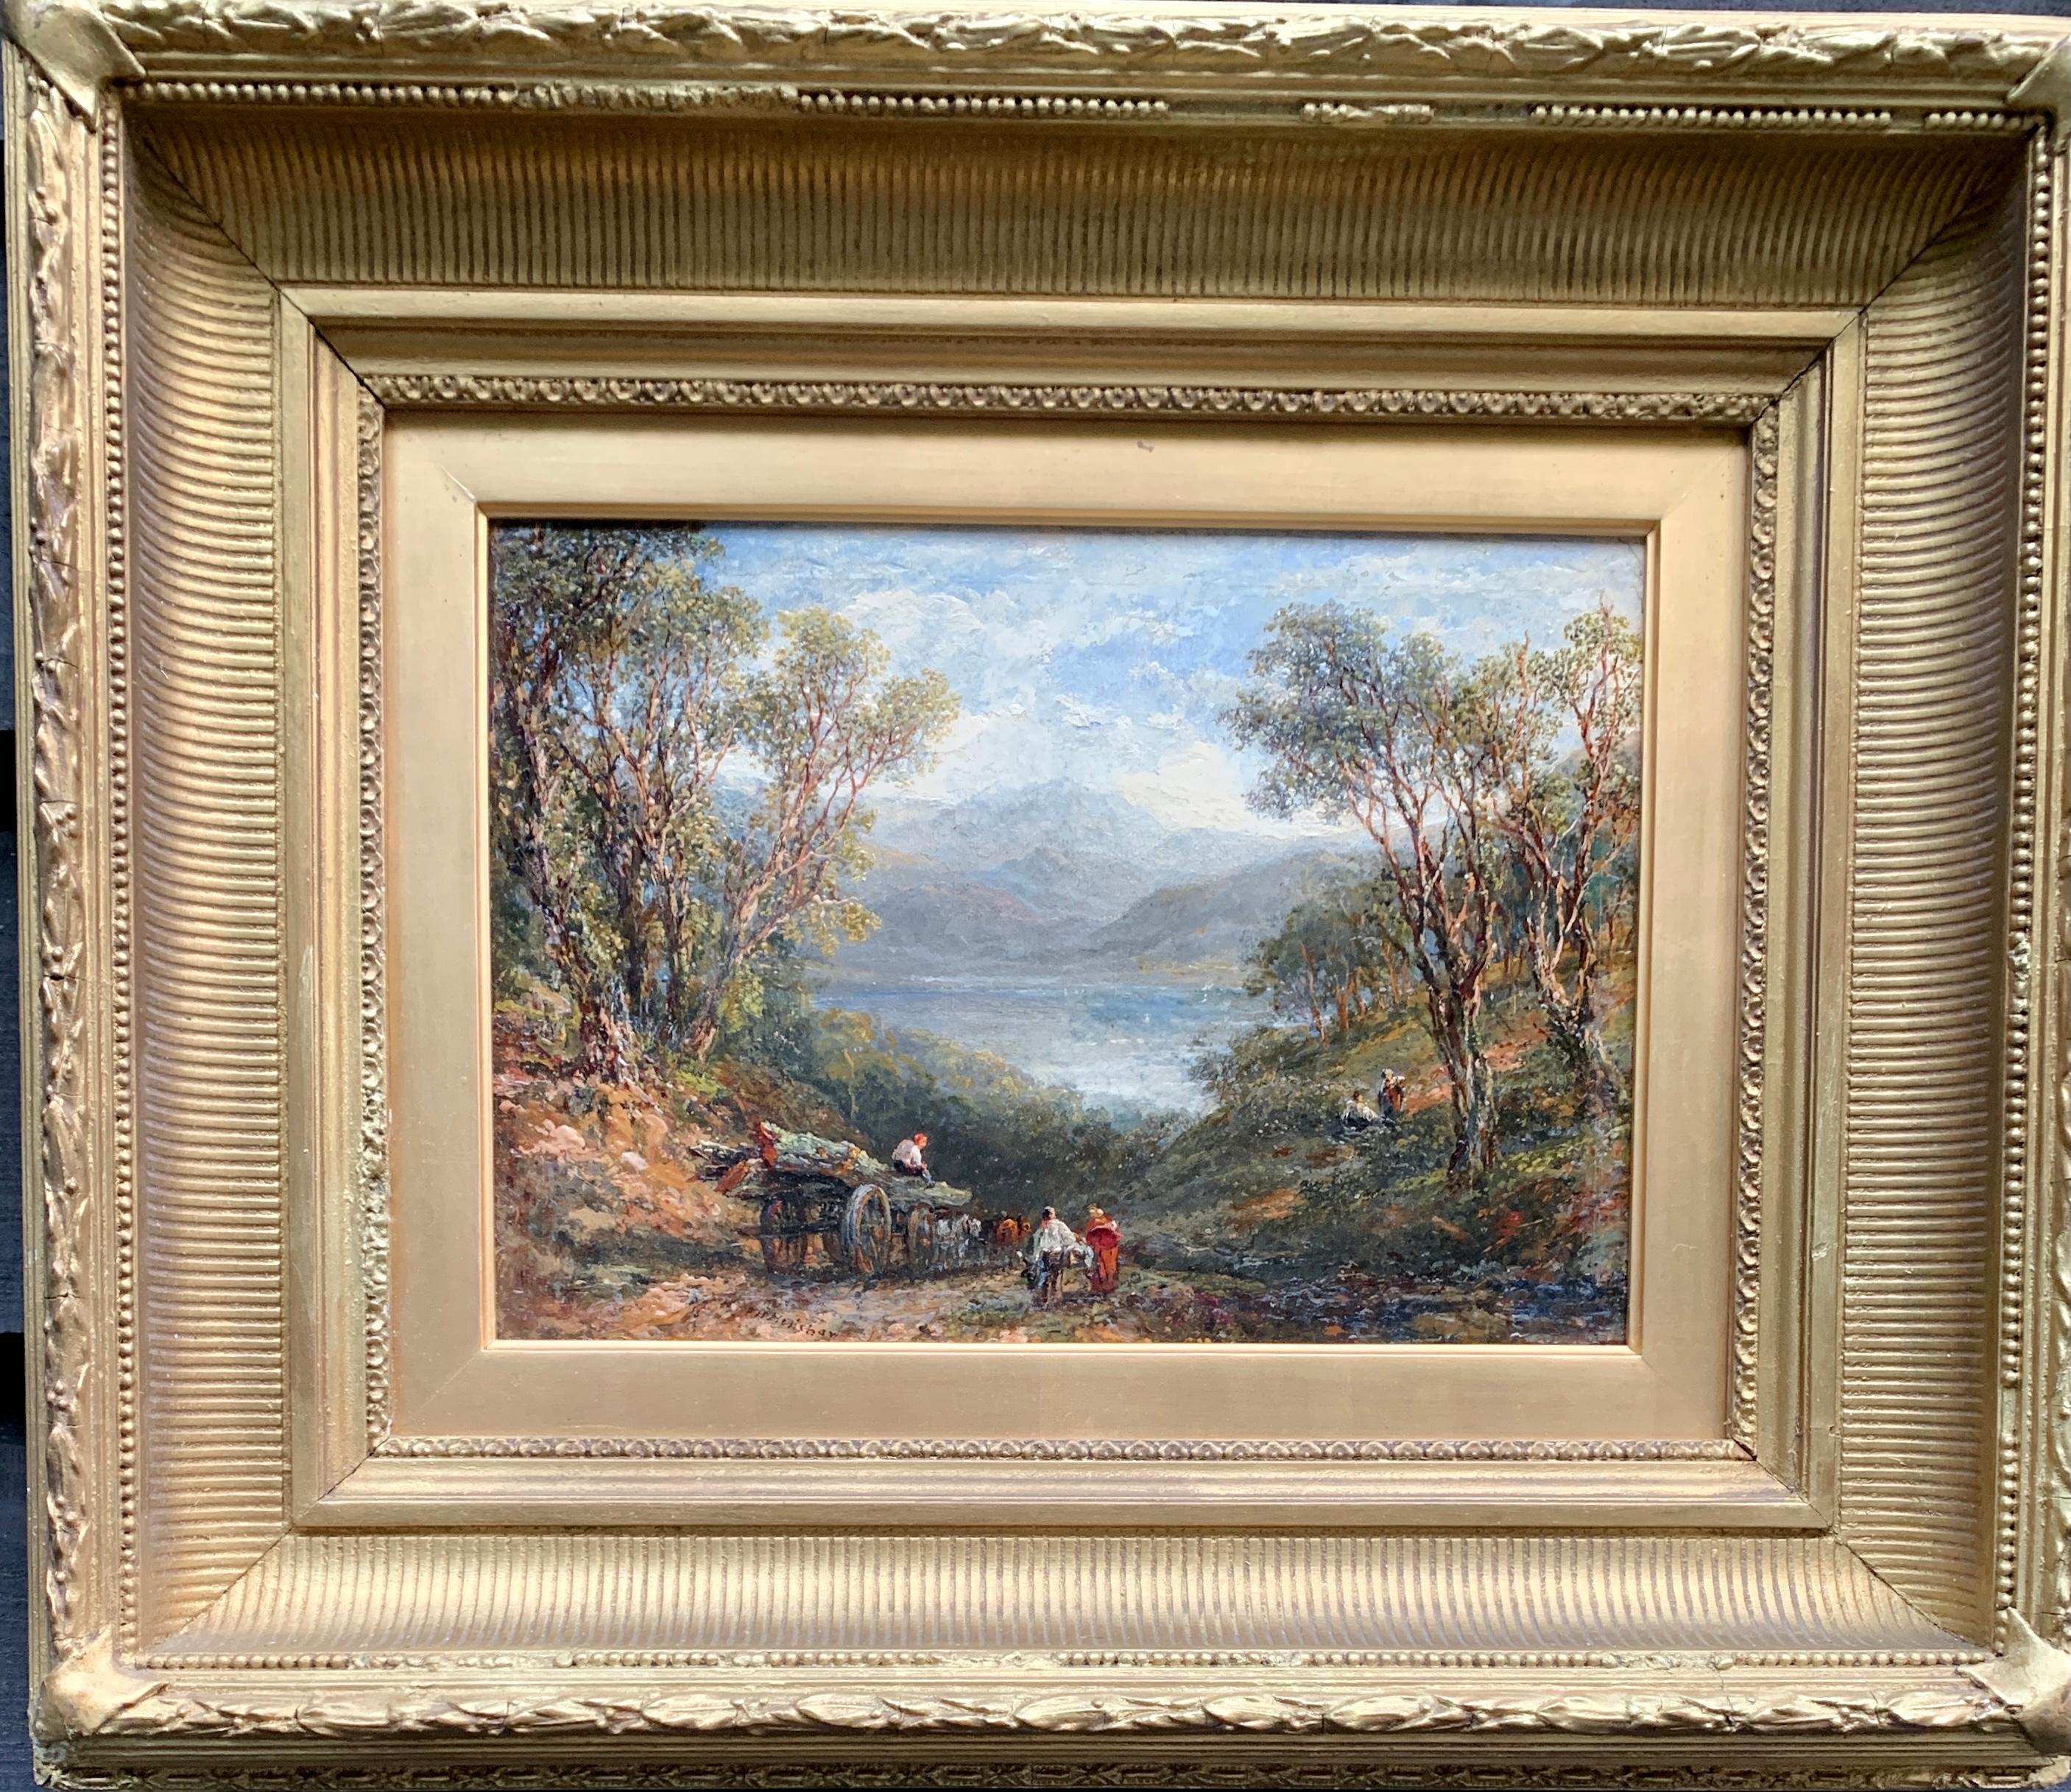 Frederick Henry Henshaw Landscape Painting - English Antique 19thC wooded landscape with horse and cart, and figures by lake